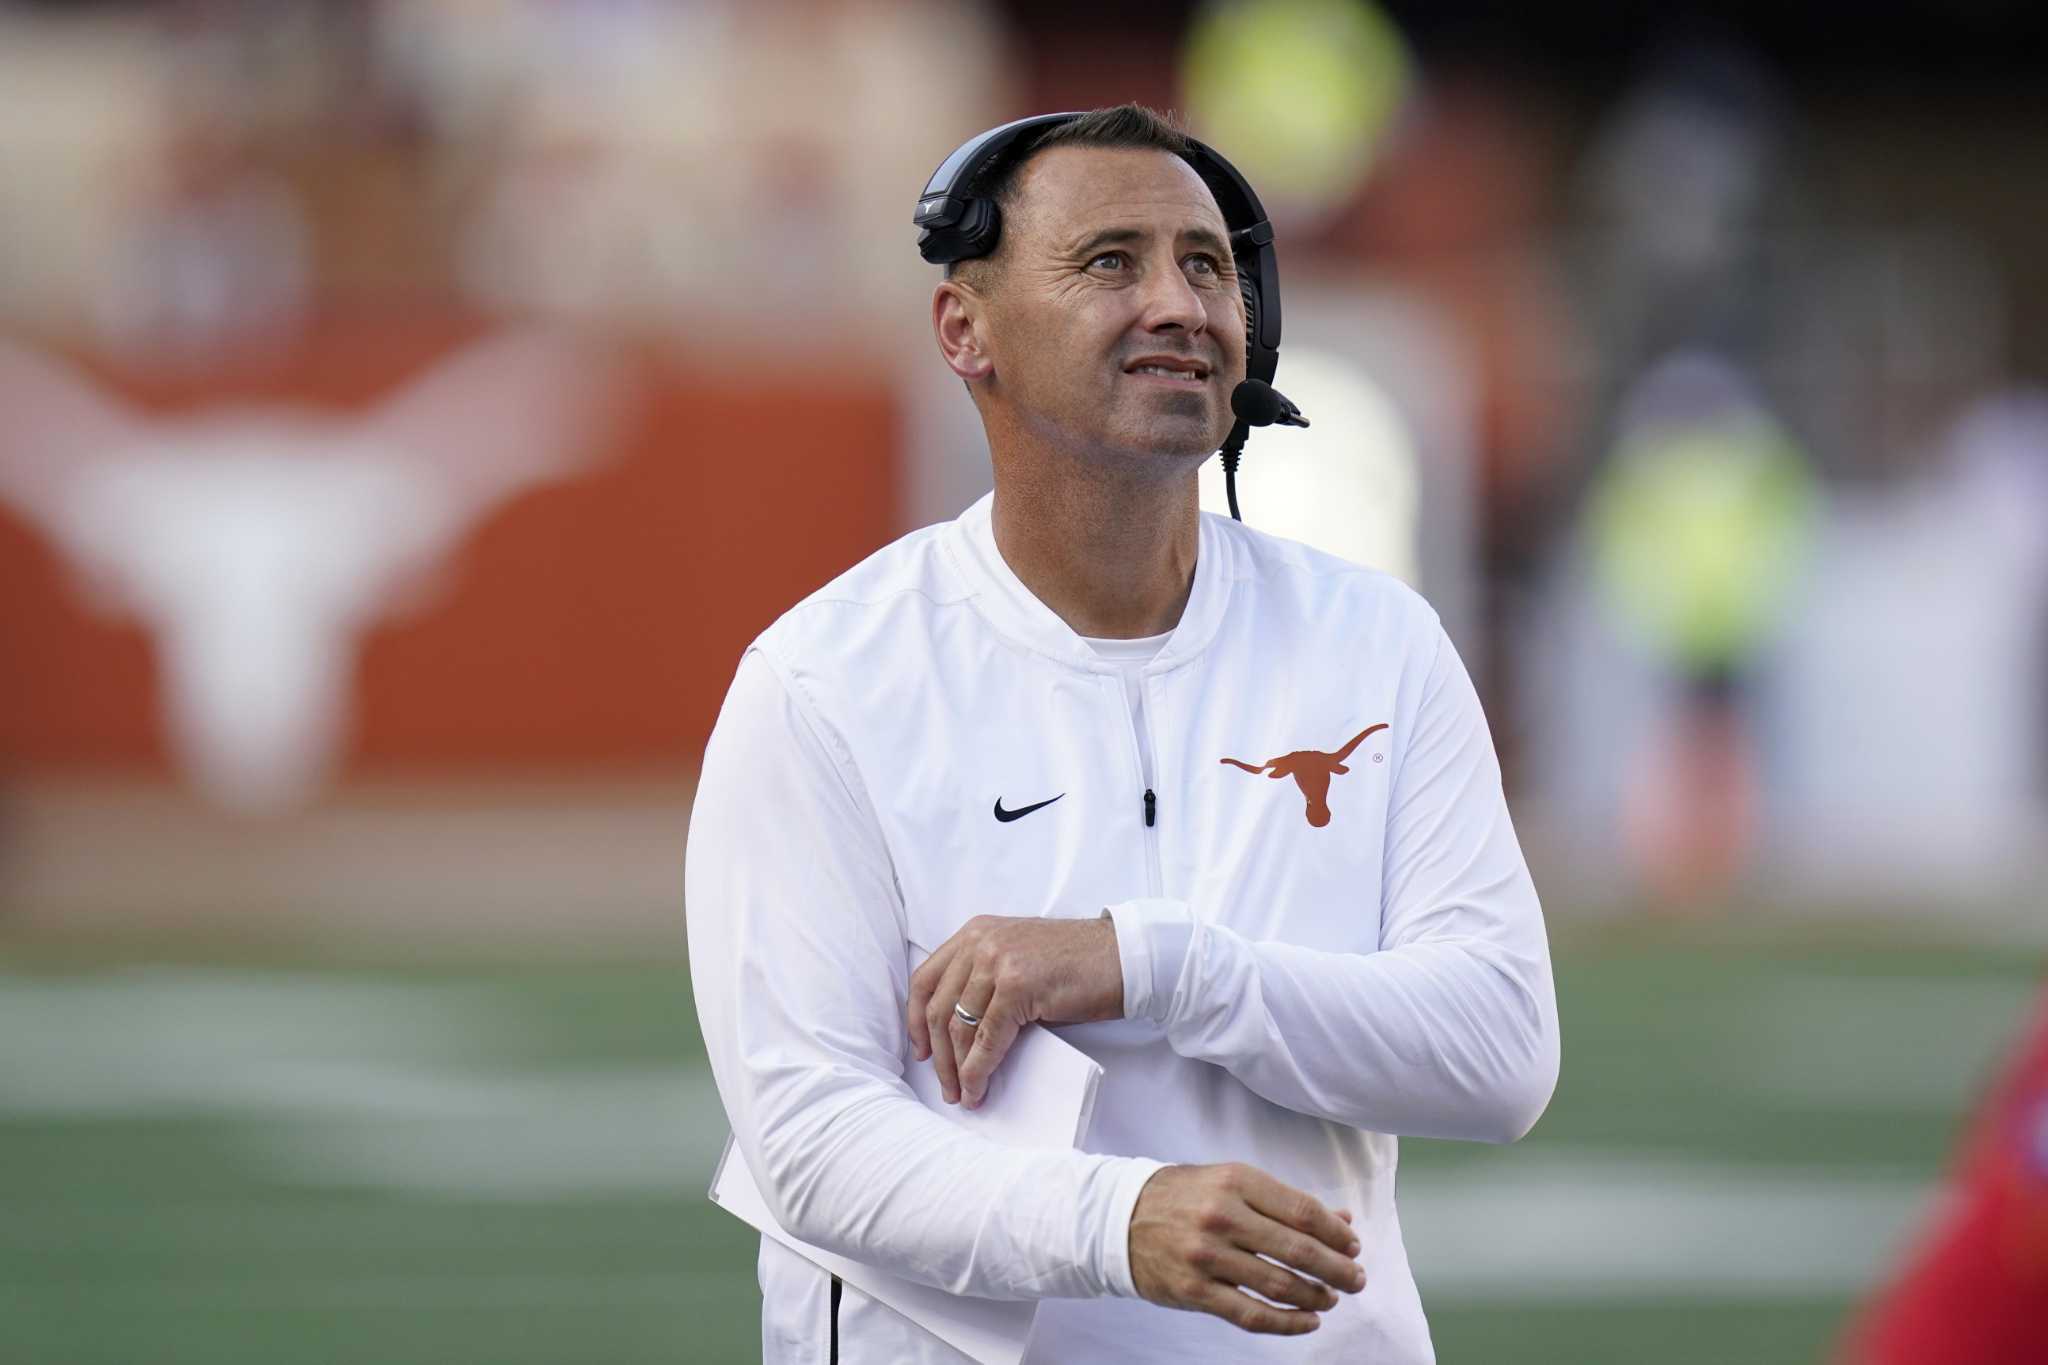 UT football coach Steve Sarkisian bought a home in posh Rollingwood after  accepting the job